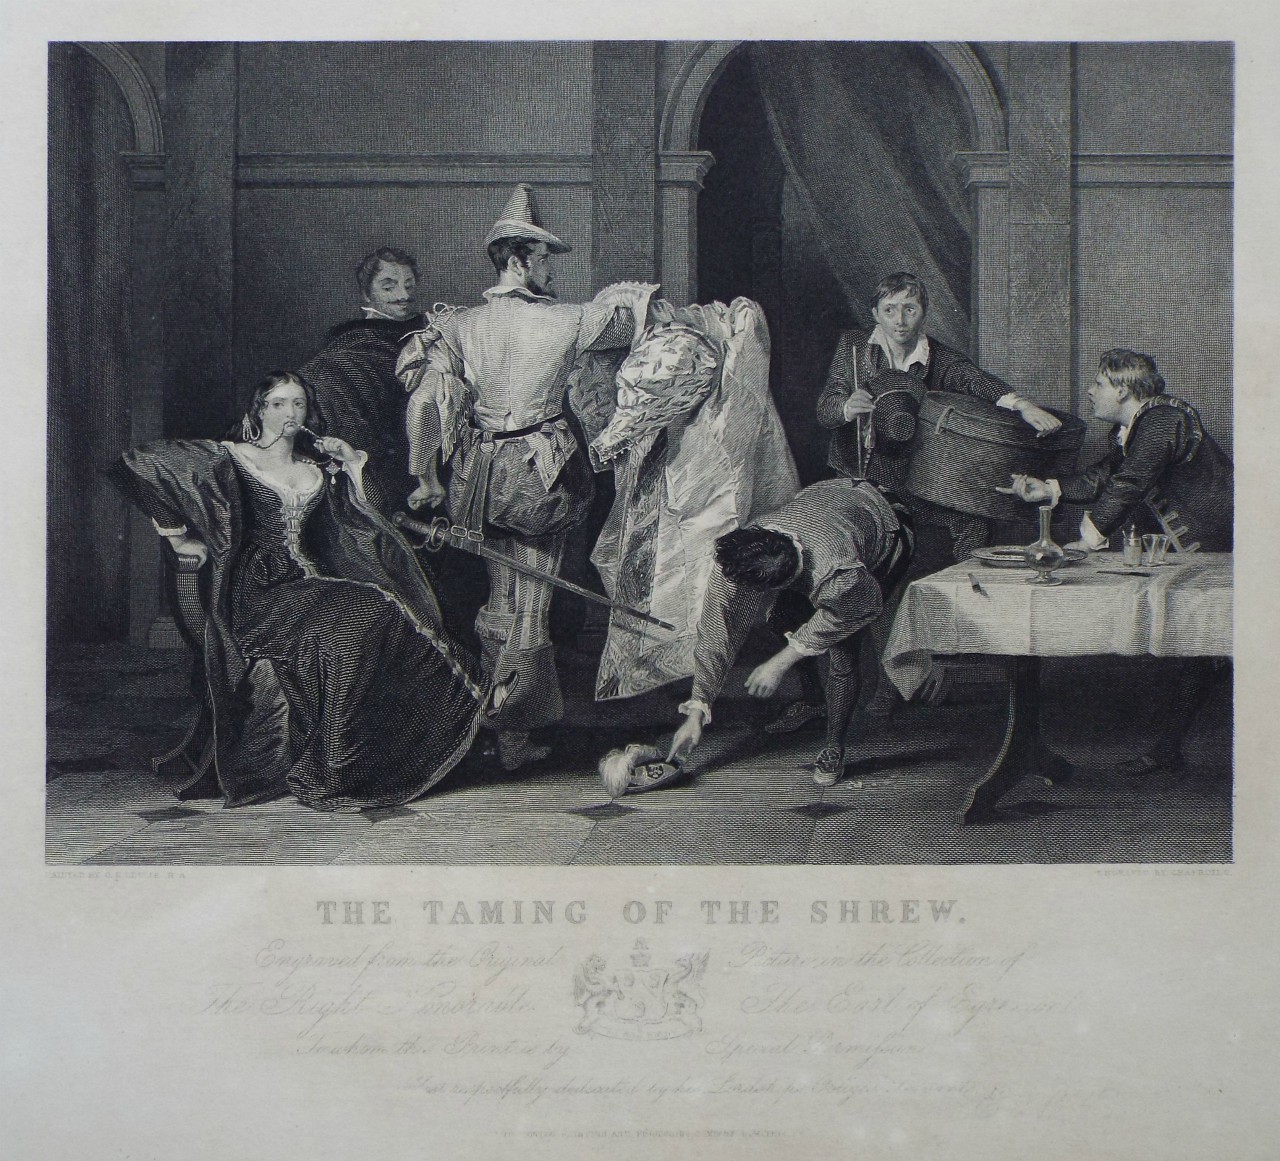 Print - The Taming of the Shrew. - Rolls